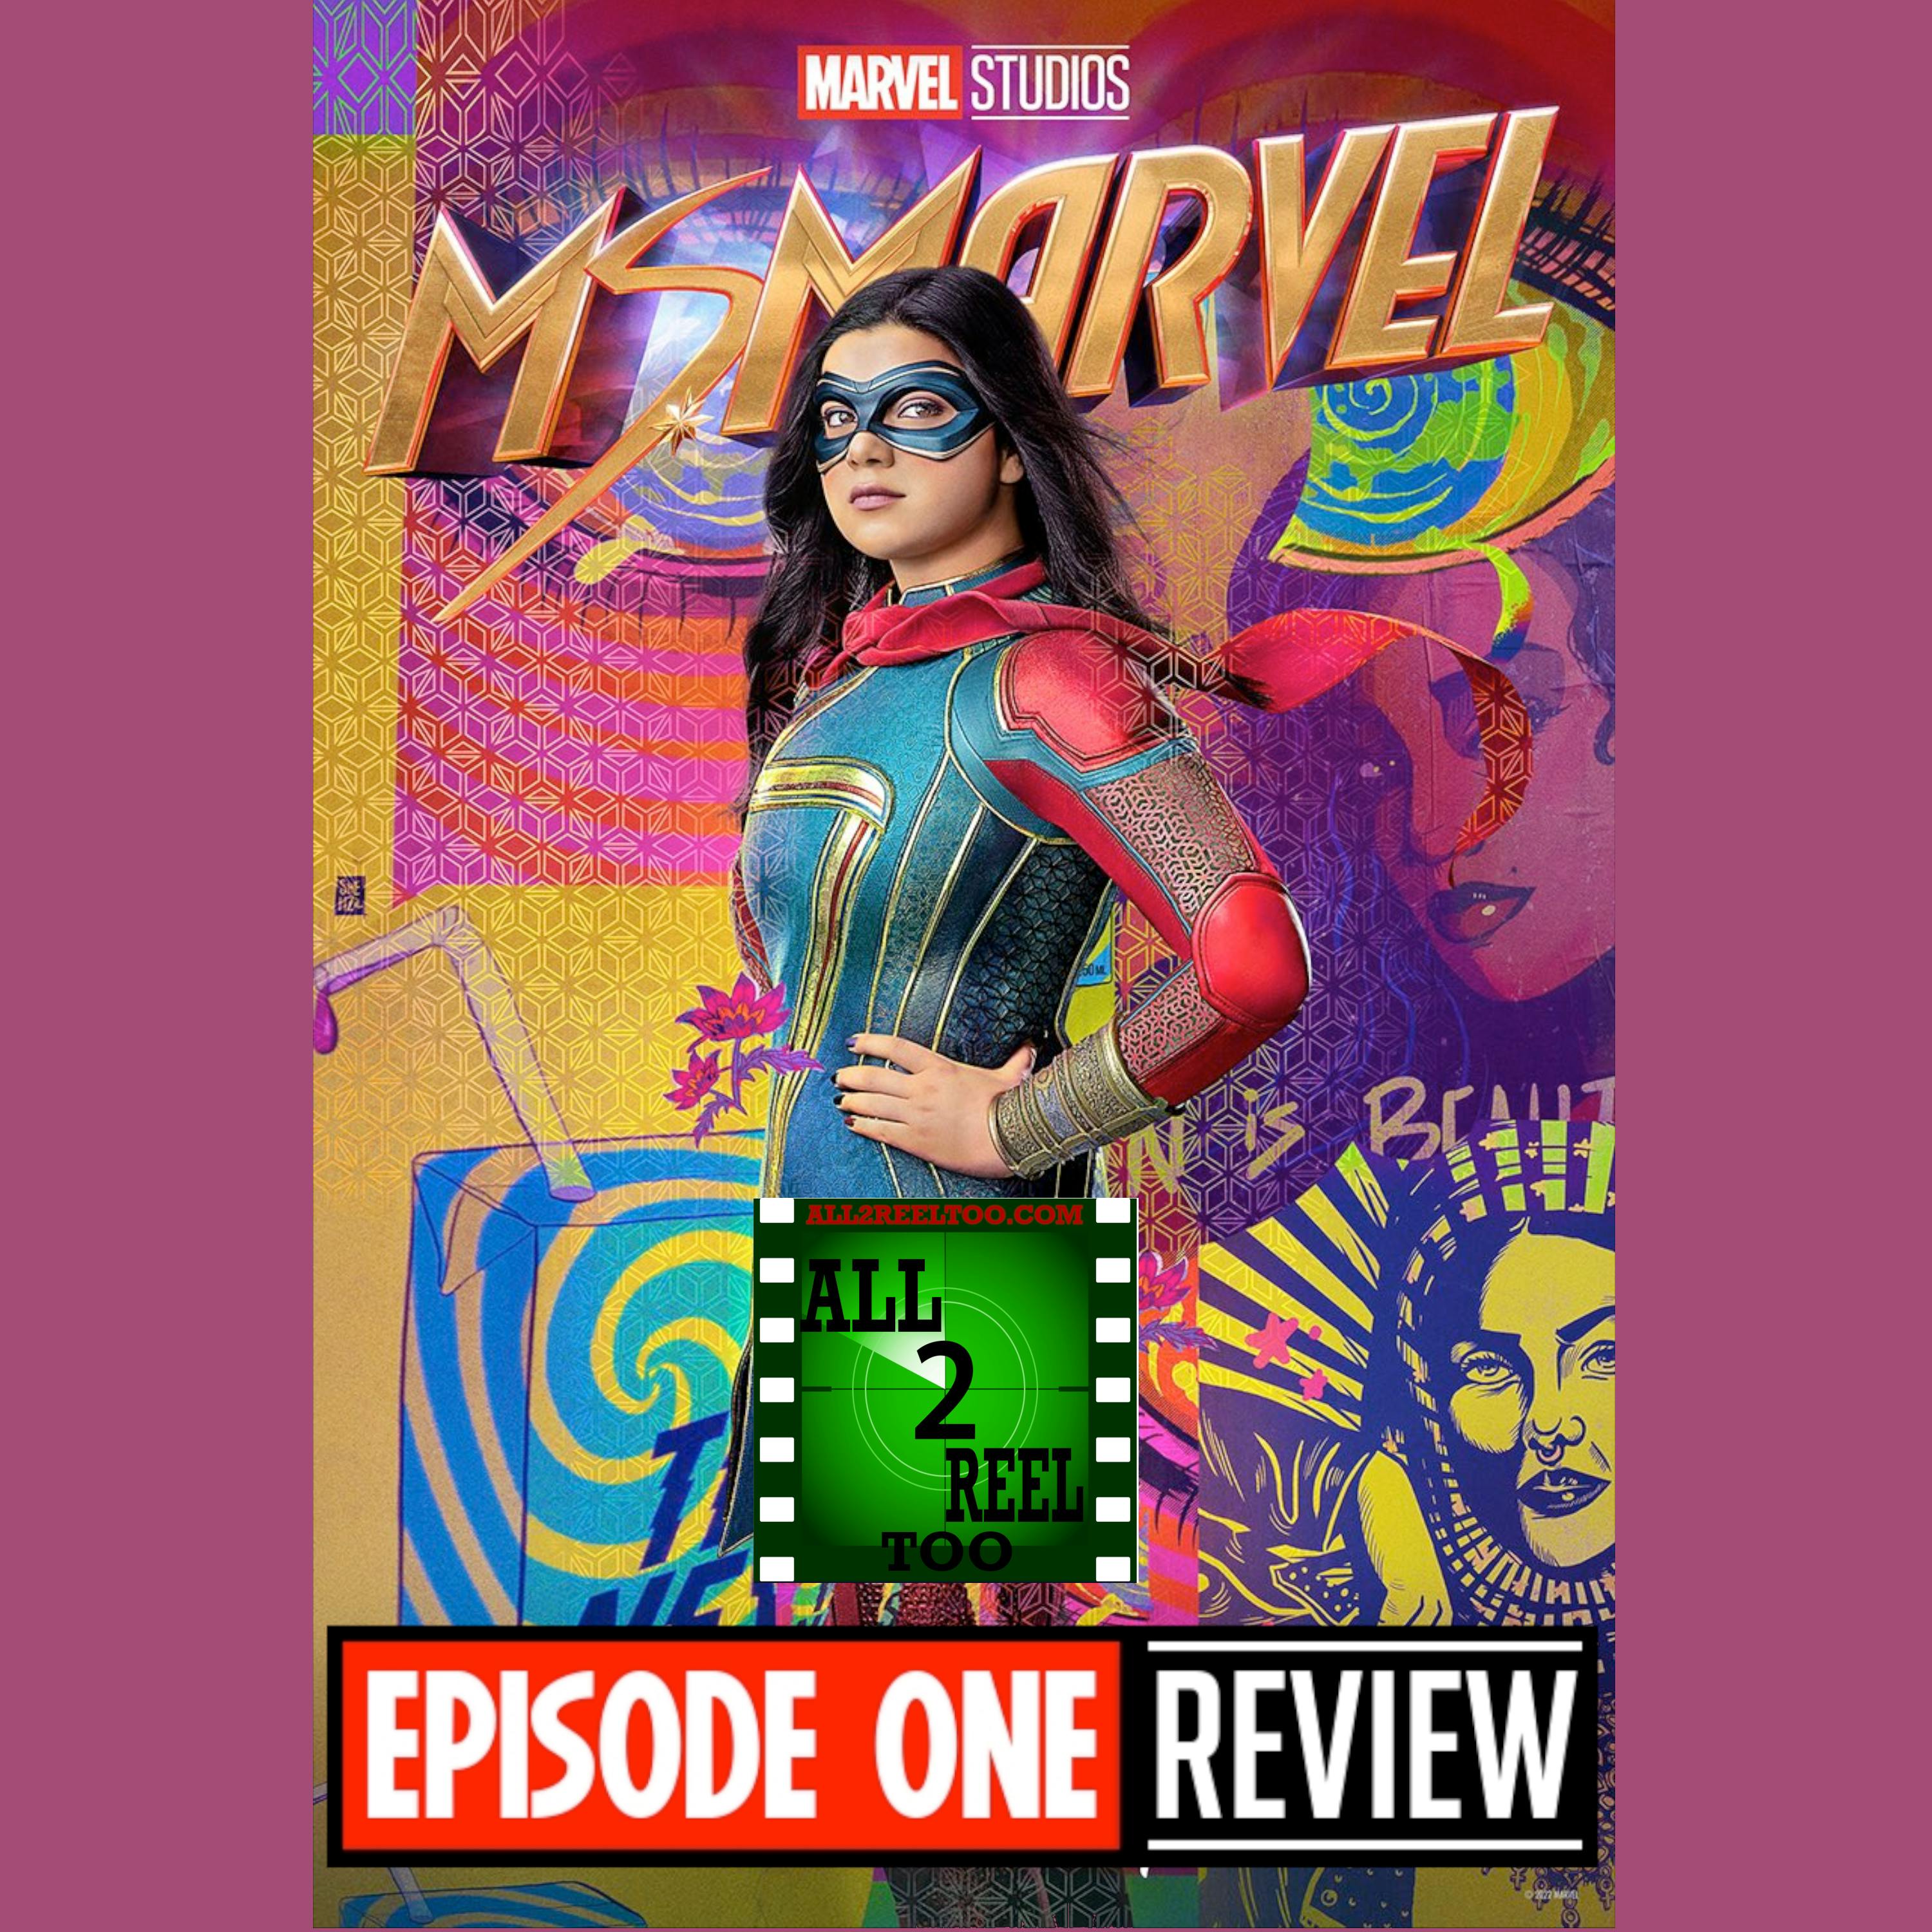 Ms. Marvel EPISODE 1 REVIEW